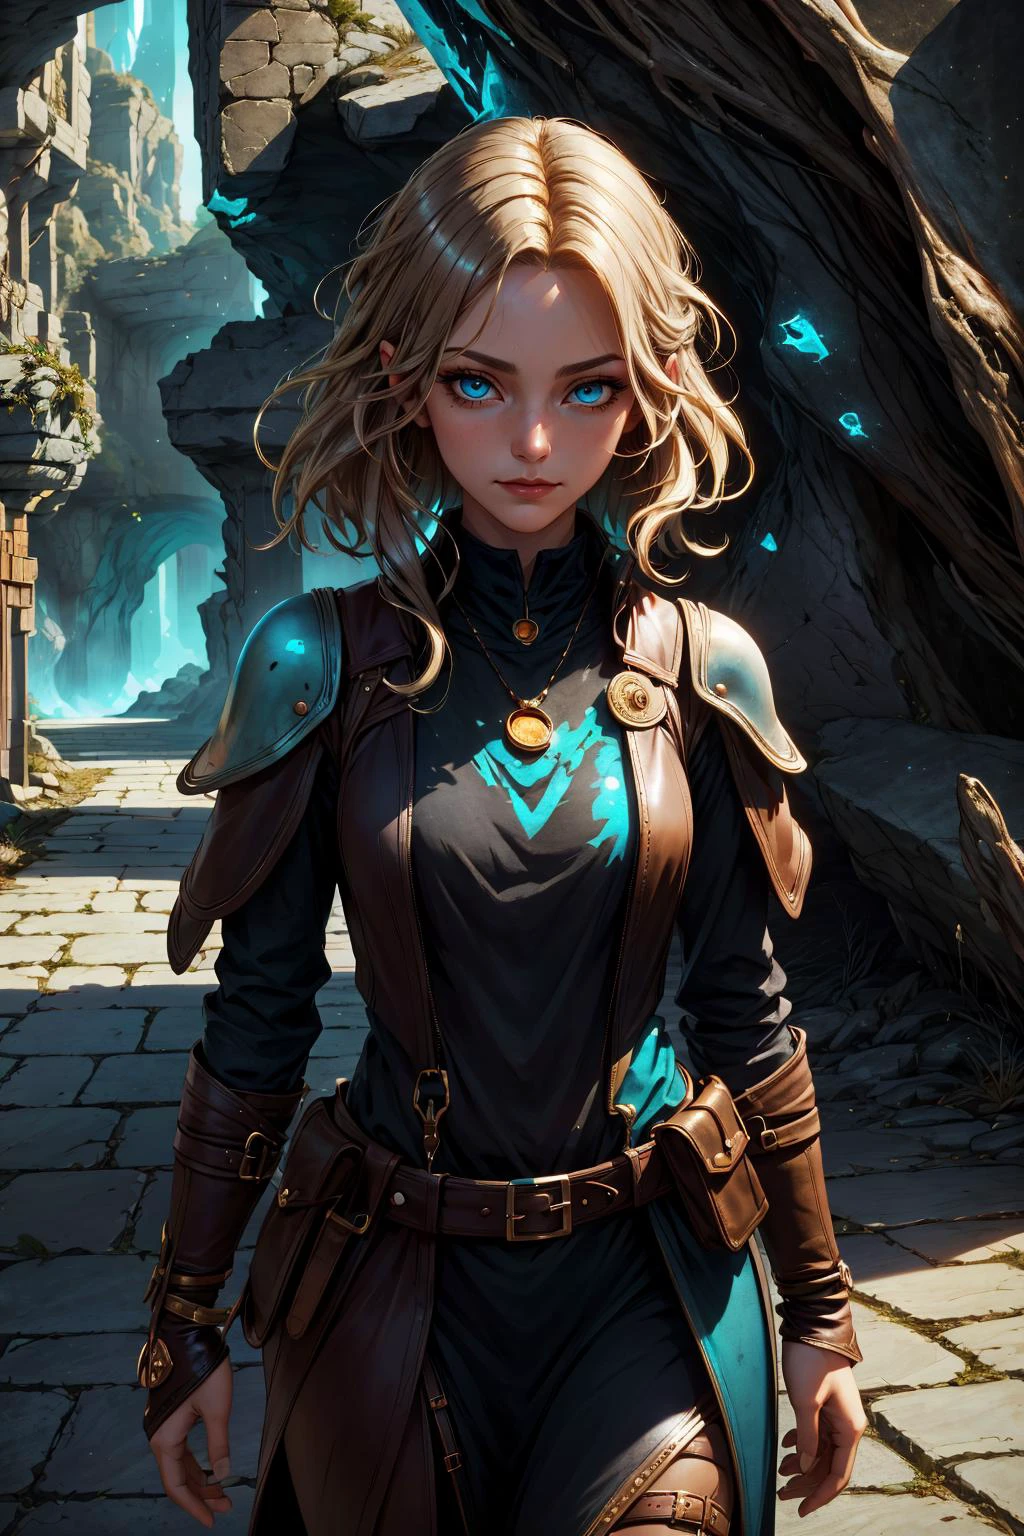 (masterpiece, best quality), 1 girl, adult (elven:0.7) woman,  teal eyes, natural blonde messy hair,
portrait, looking down, solo, (full body:0.6), detailed background, detailed face, (dwemertech, ancient theme:1.1), smirk, smuggler,    dynamic pose, elaborate dark leather (armor:0.7), belts, keys,  small leather pouch,  high fantasy medieval setting, dark cave background, stealth,   suspicious,   stolen goods,  (crates in background:0.8), secret passage,  shadows,  dark atmosphere,